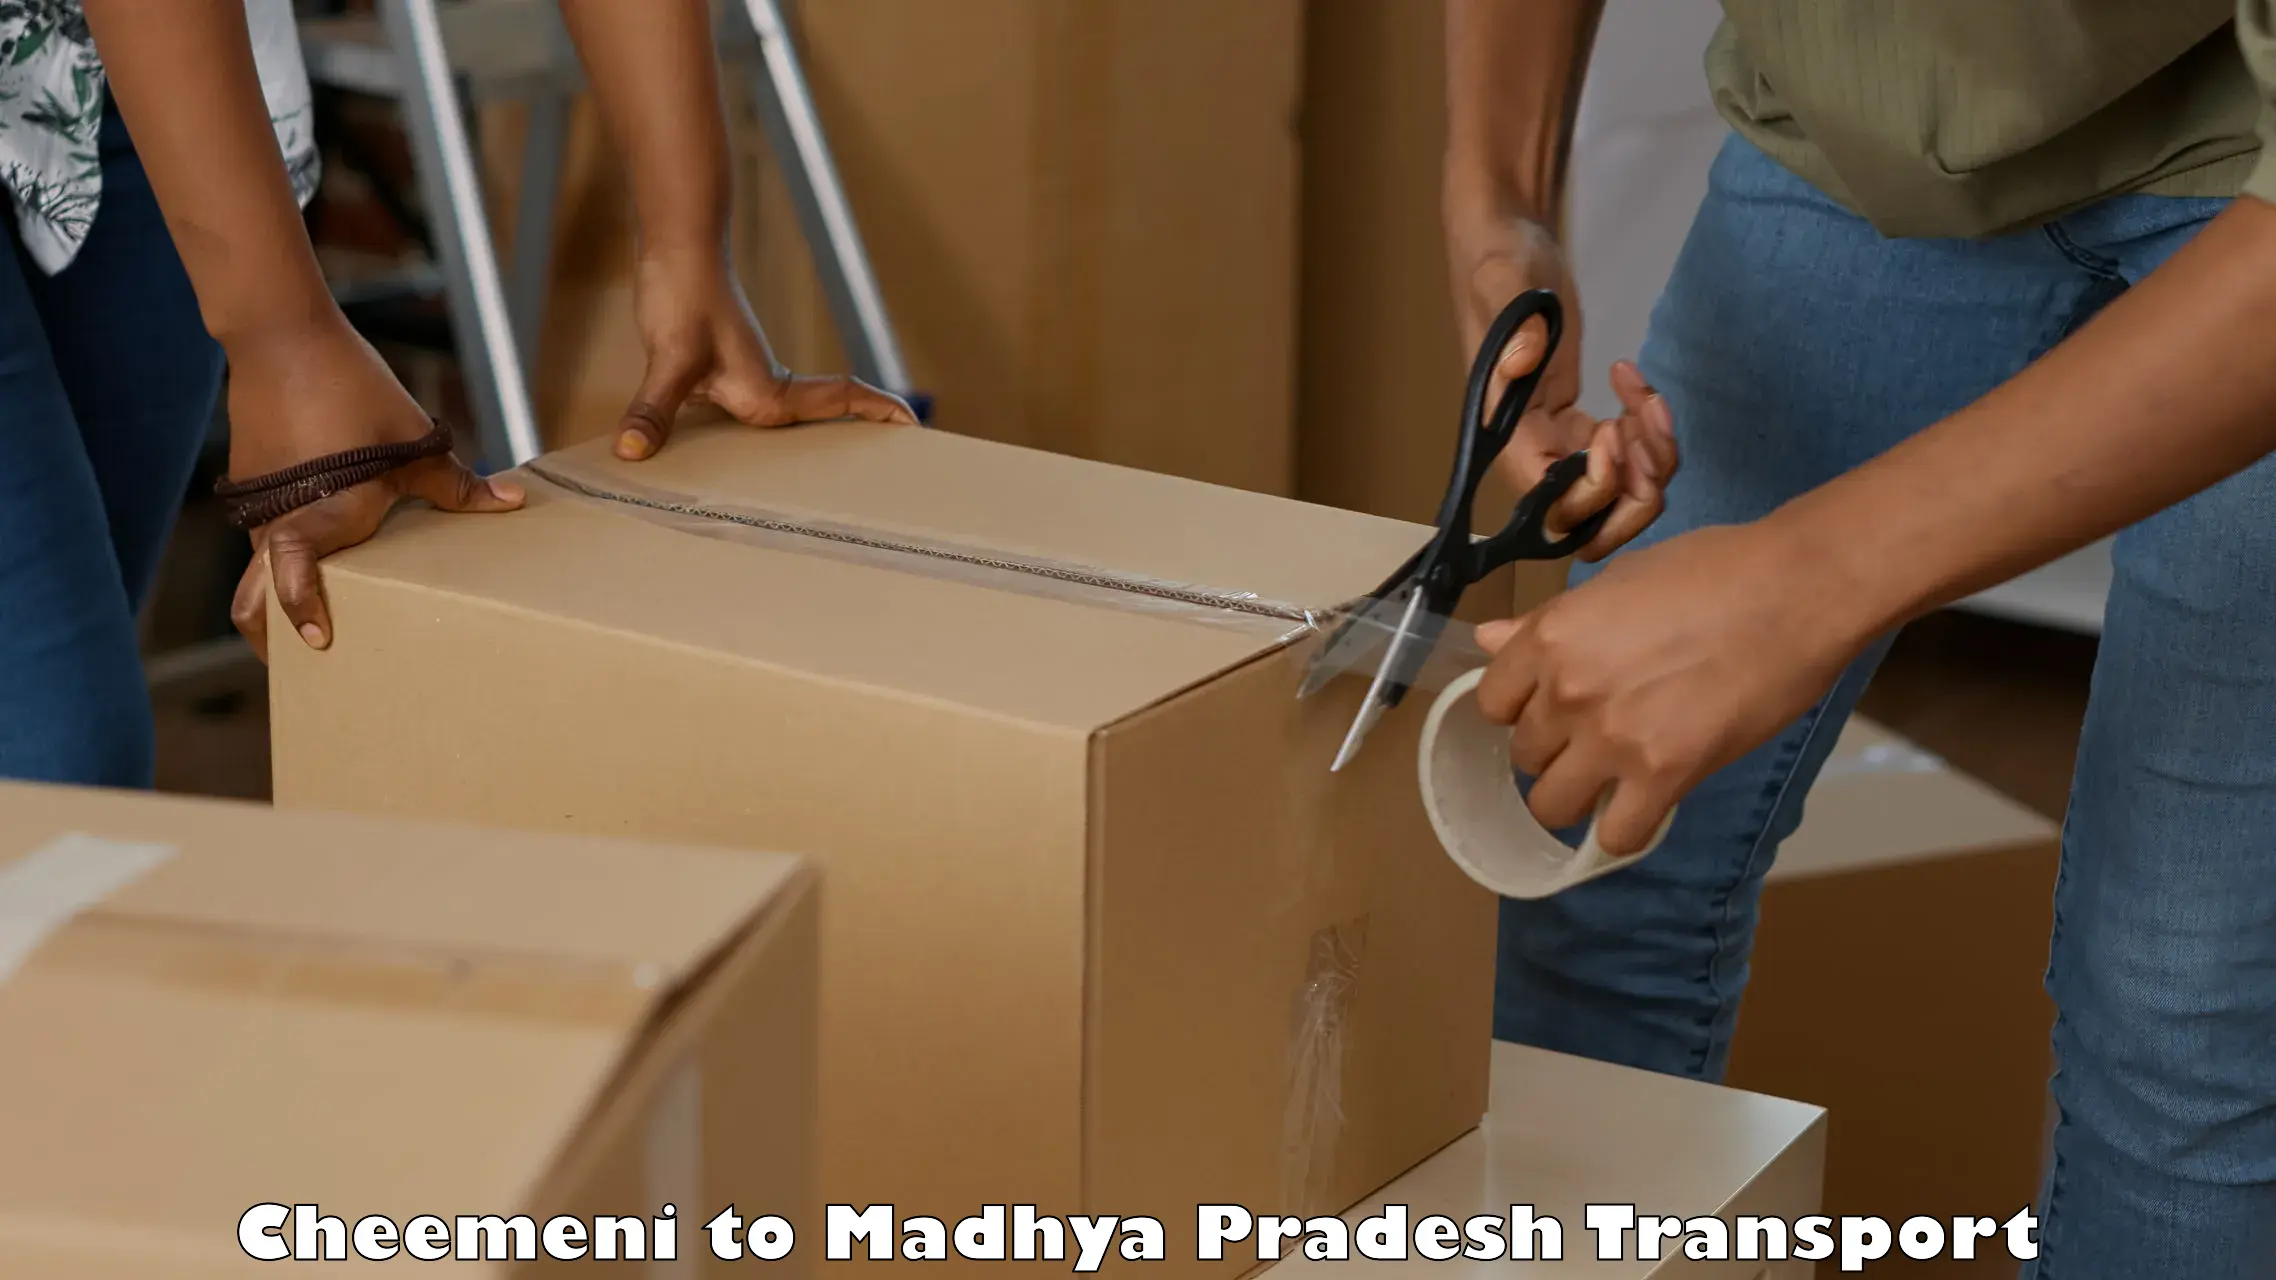 Shipping services Cheemeni to IIIT Bhopal